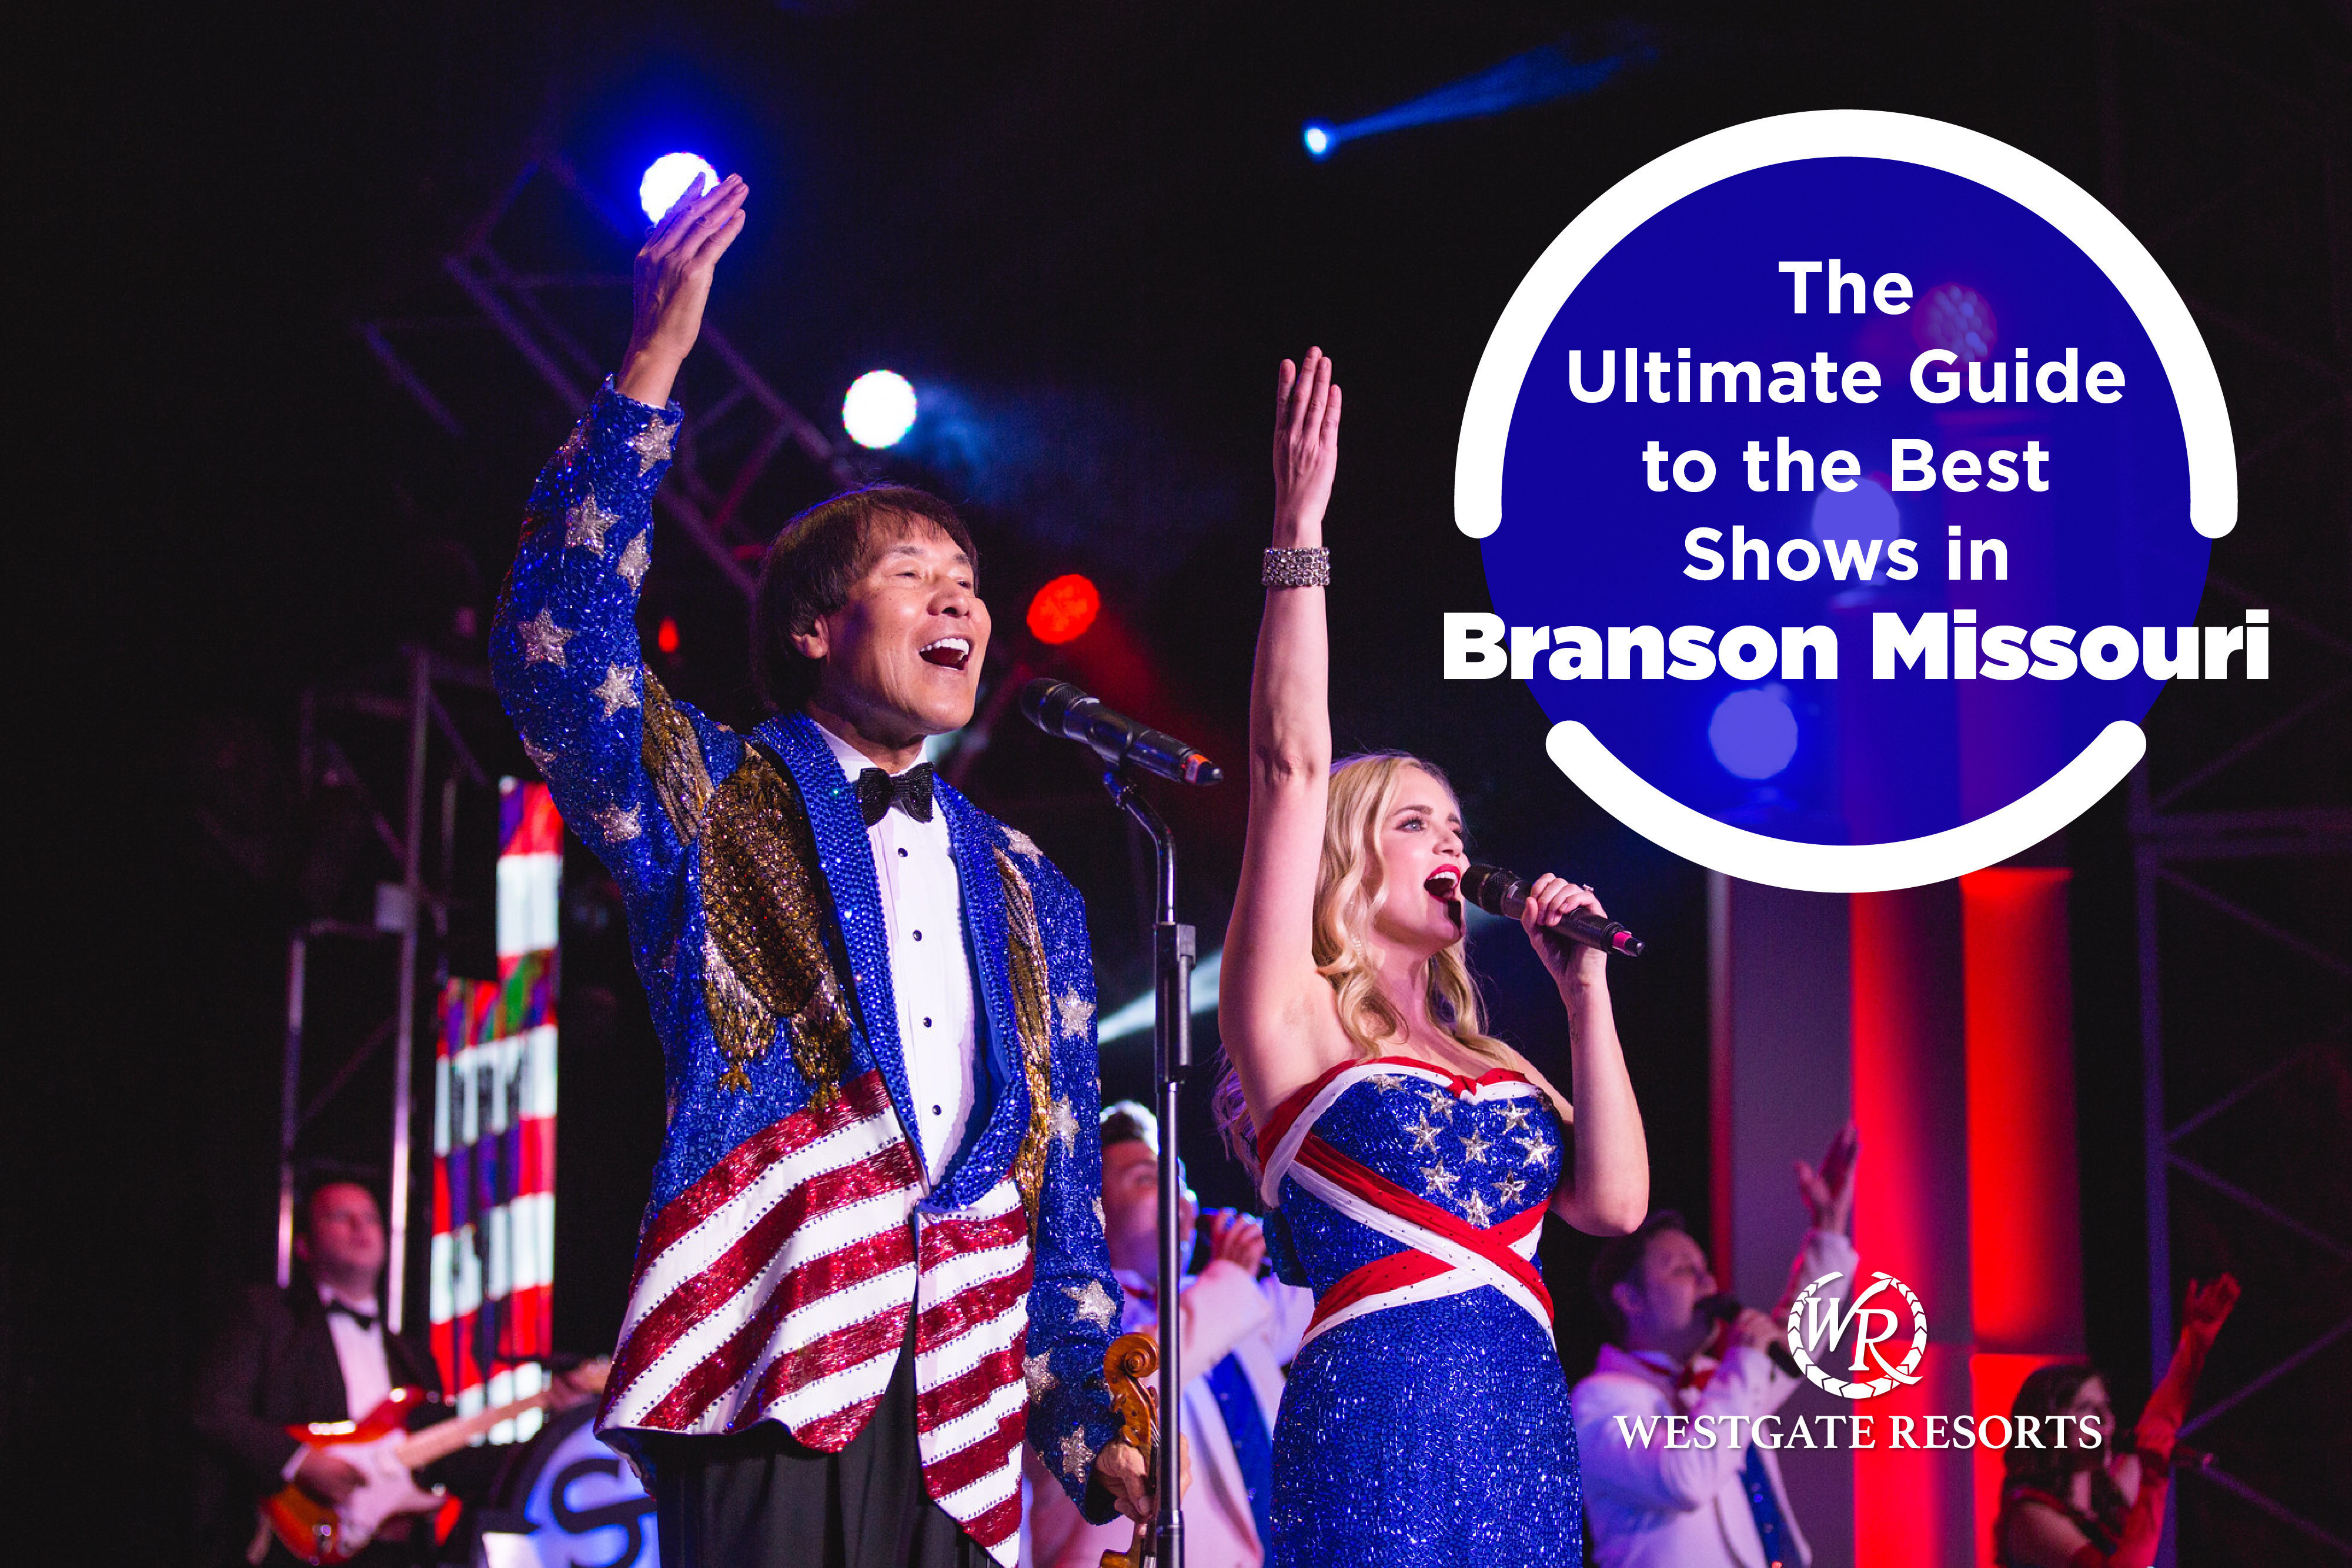 The Ultimate Guide to the Best Shows in Branson Missouri